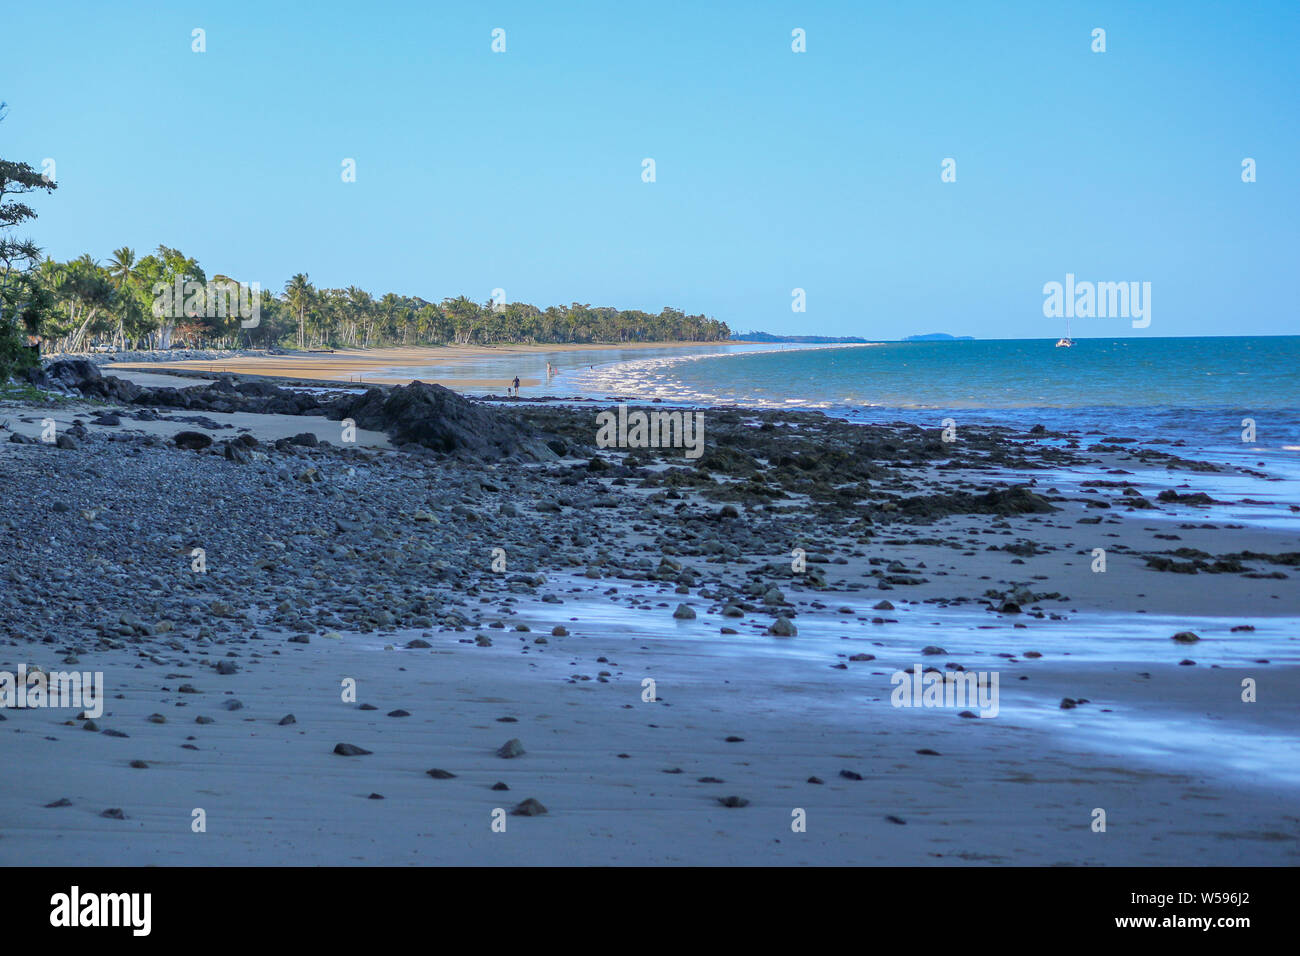 South end of Mission Beach, Queensland, Australia Stock Photo